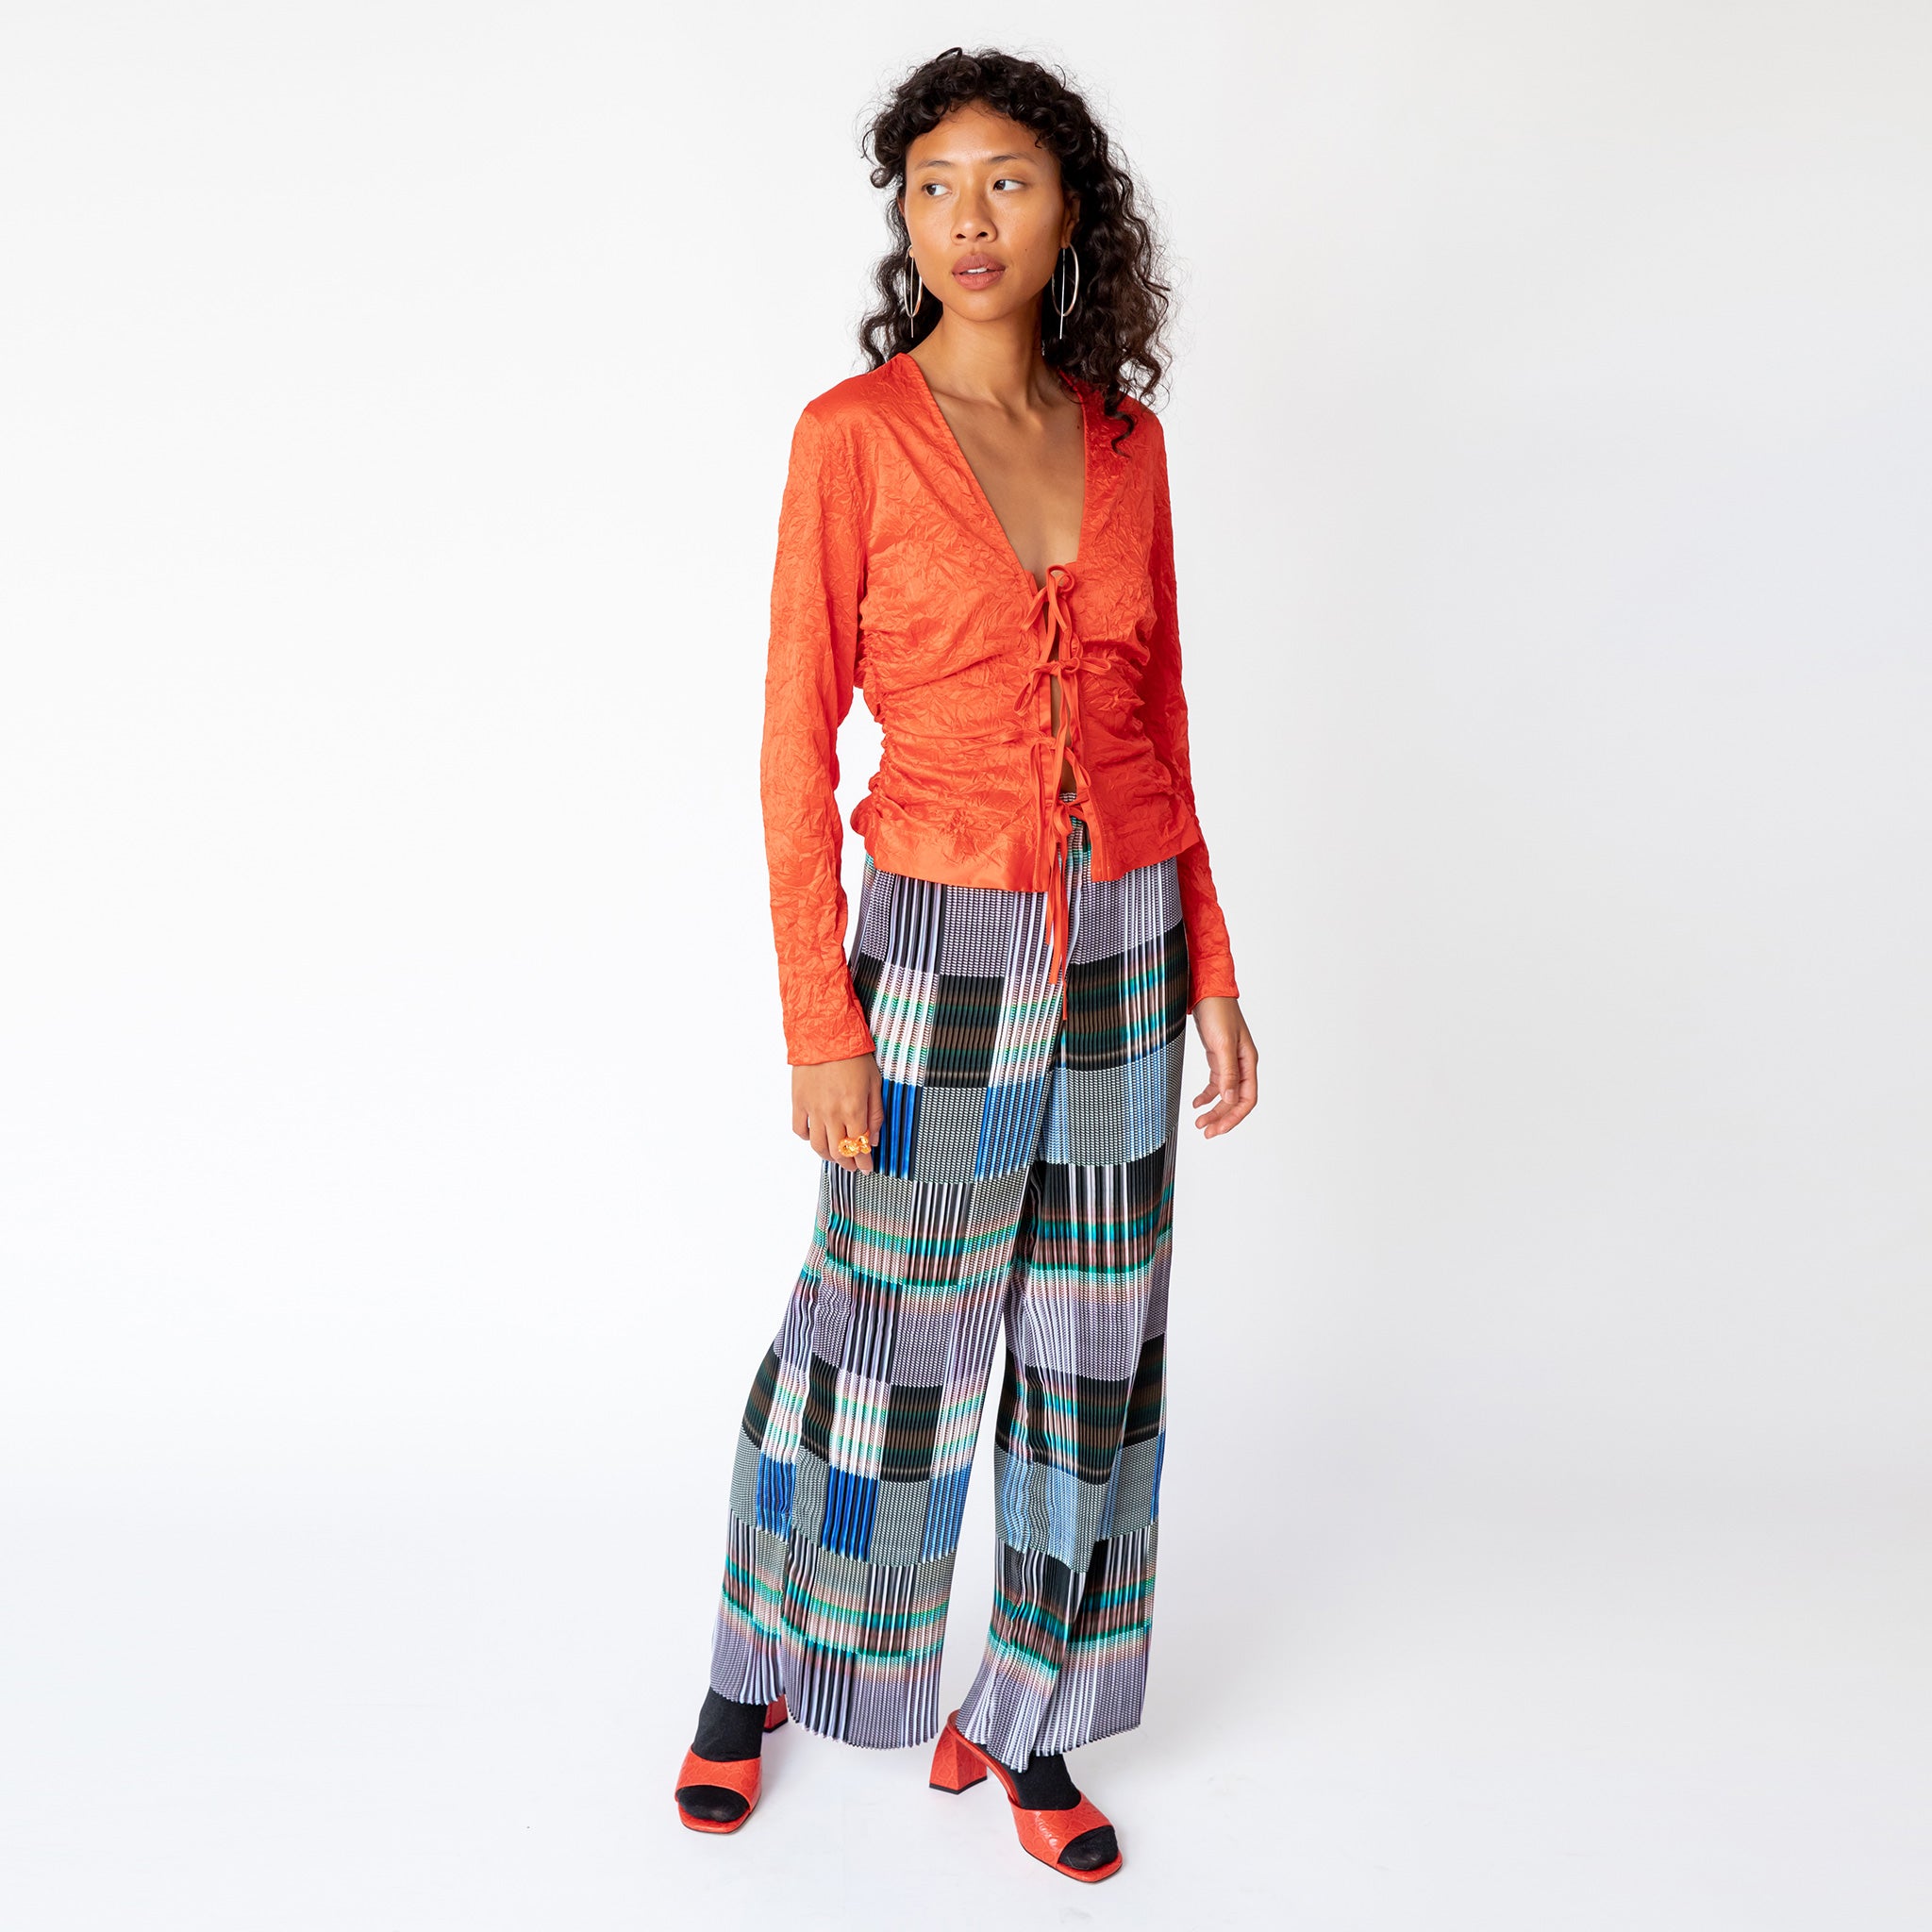 Front view of the Julie Heuer pleated Jack Trousers in a gridded print pattern as worn with a vibrant red blouse.